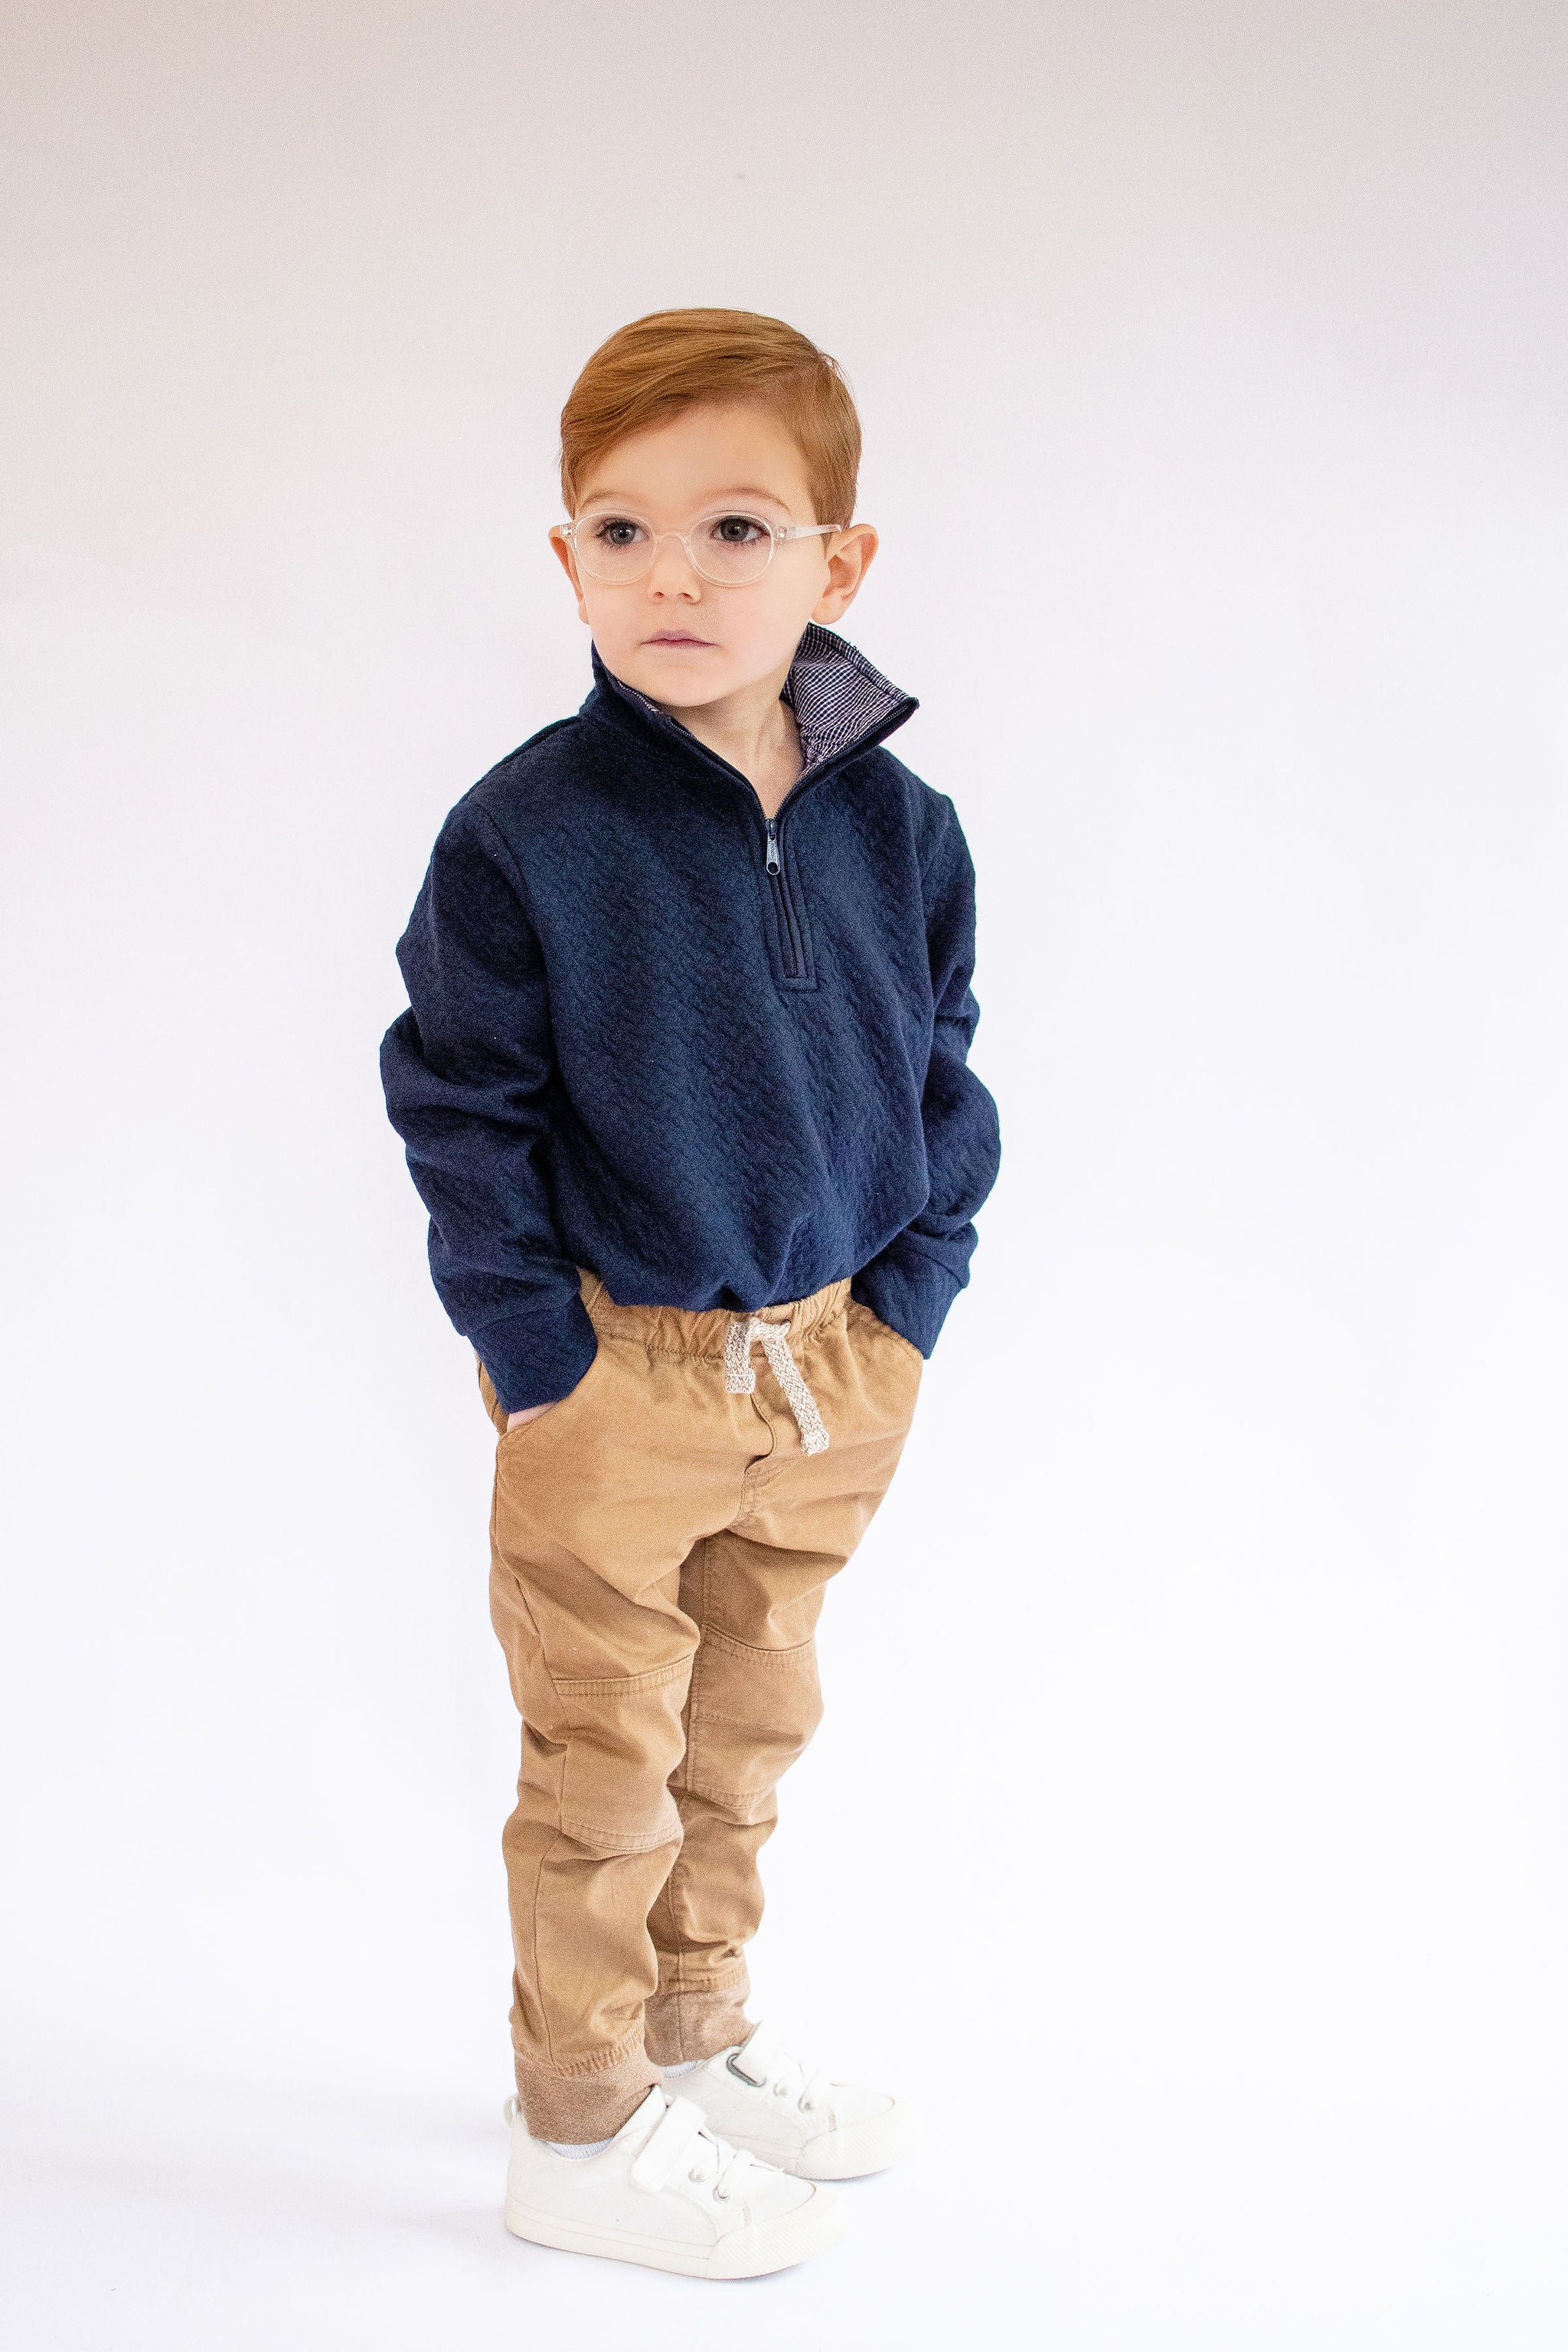 Casual Shirt and Denim Shorts | Boys summer outfits, Stylish baby boy  outfits, Kids outfits